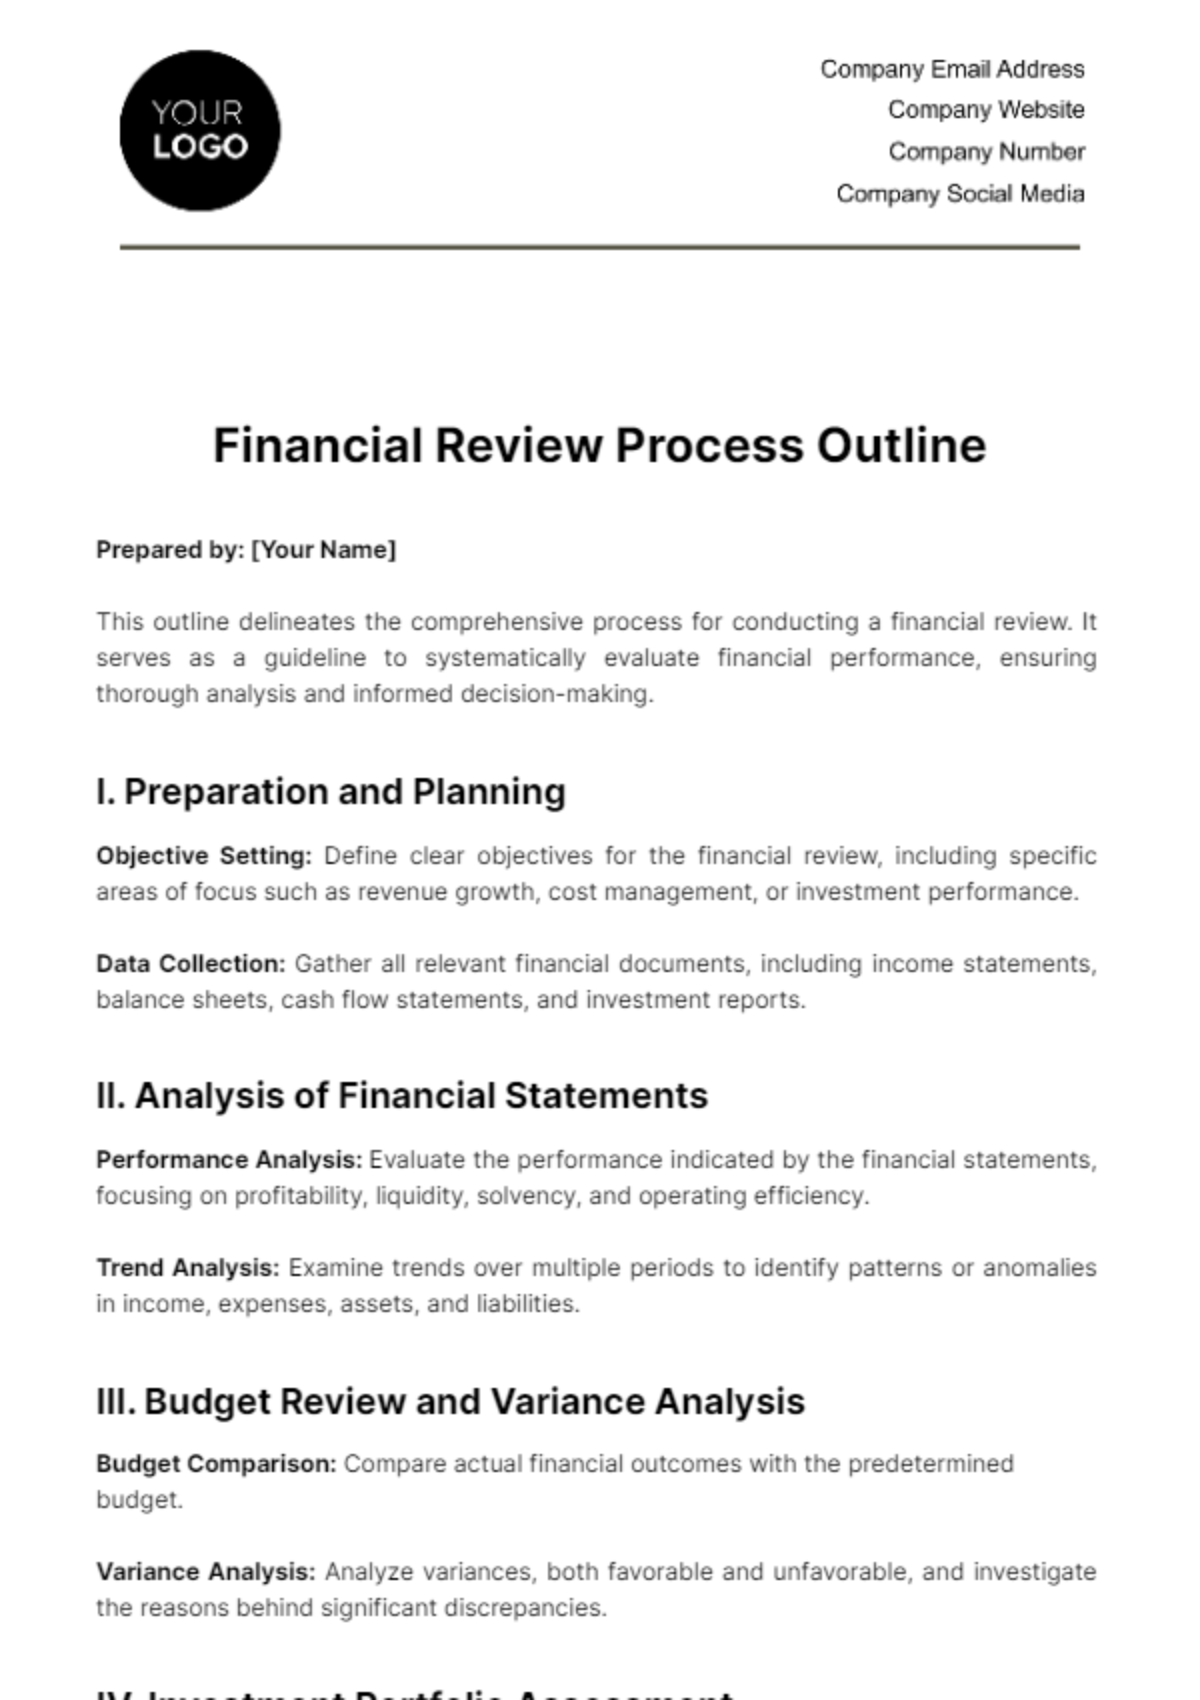 Financial Review Process Outline Template